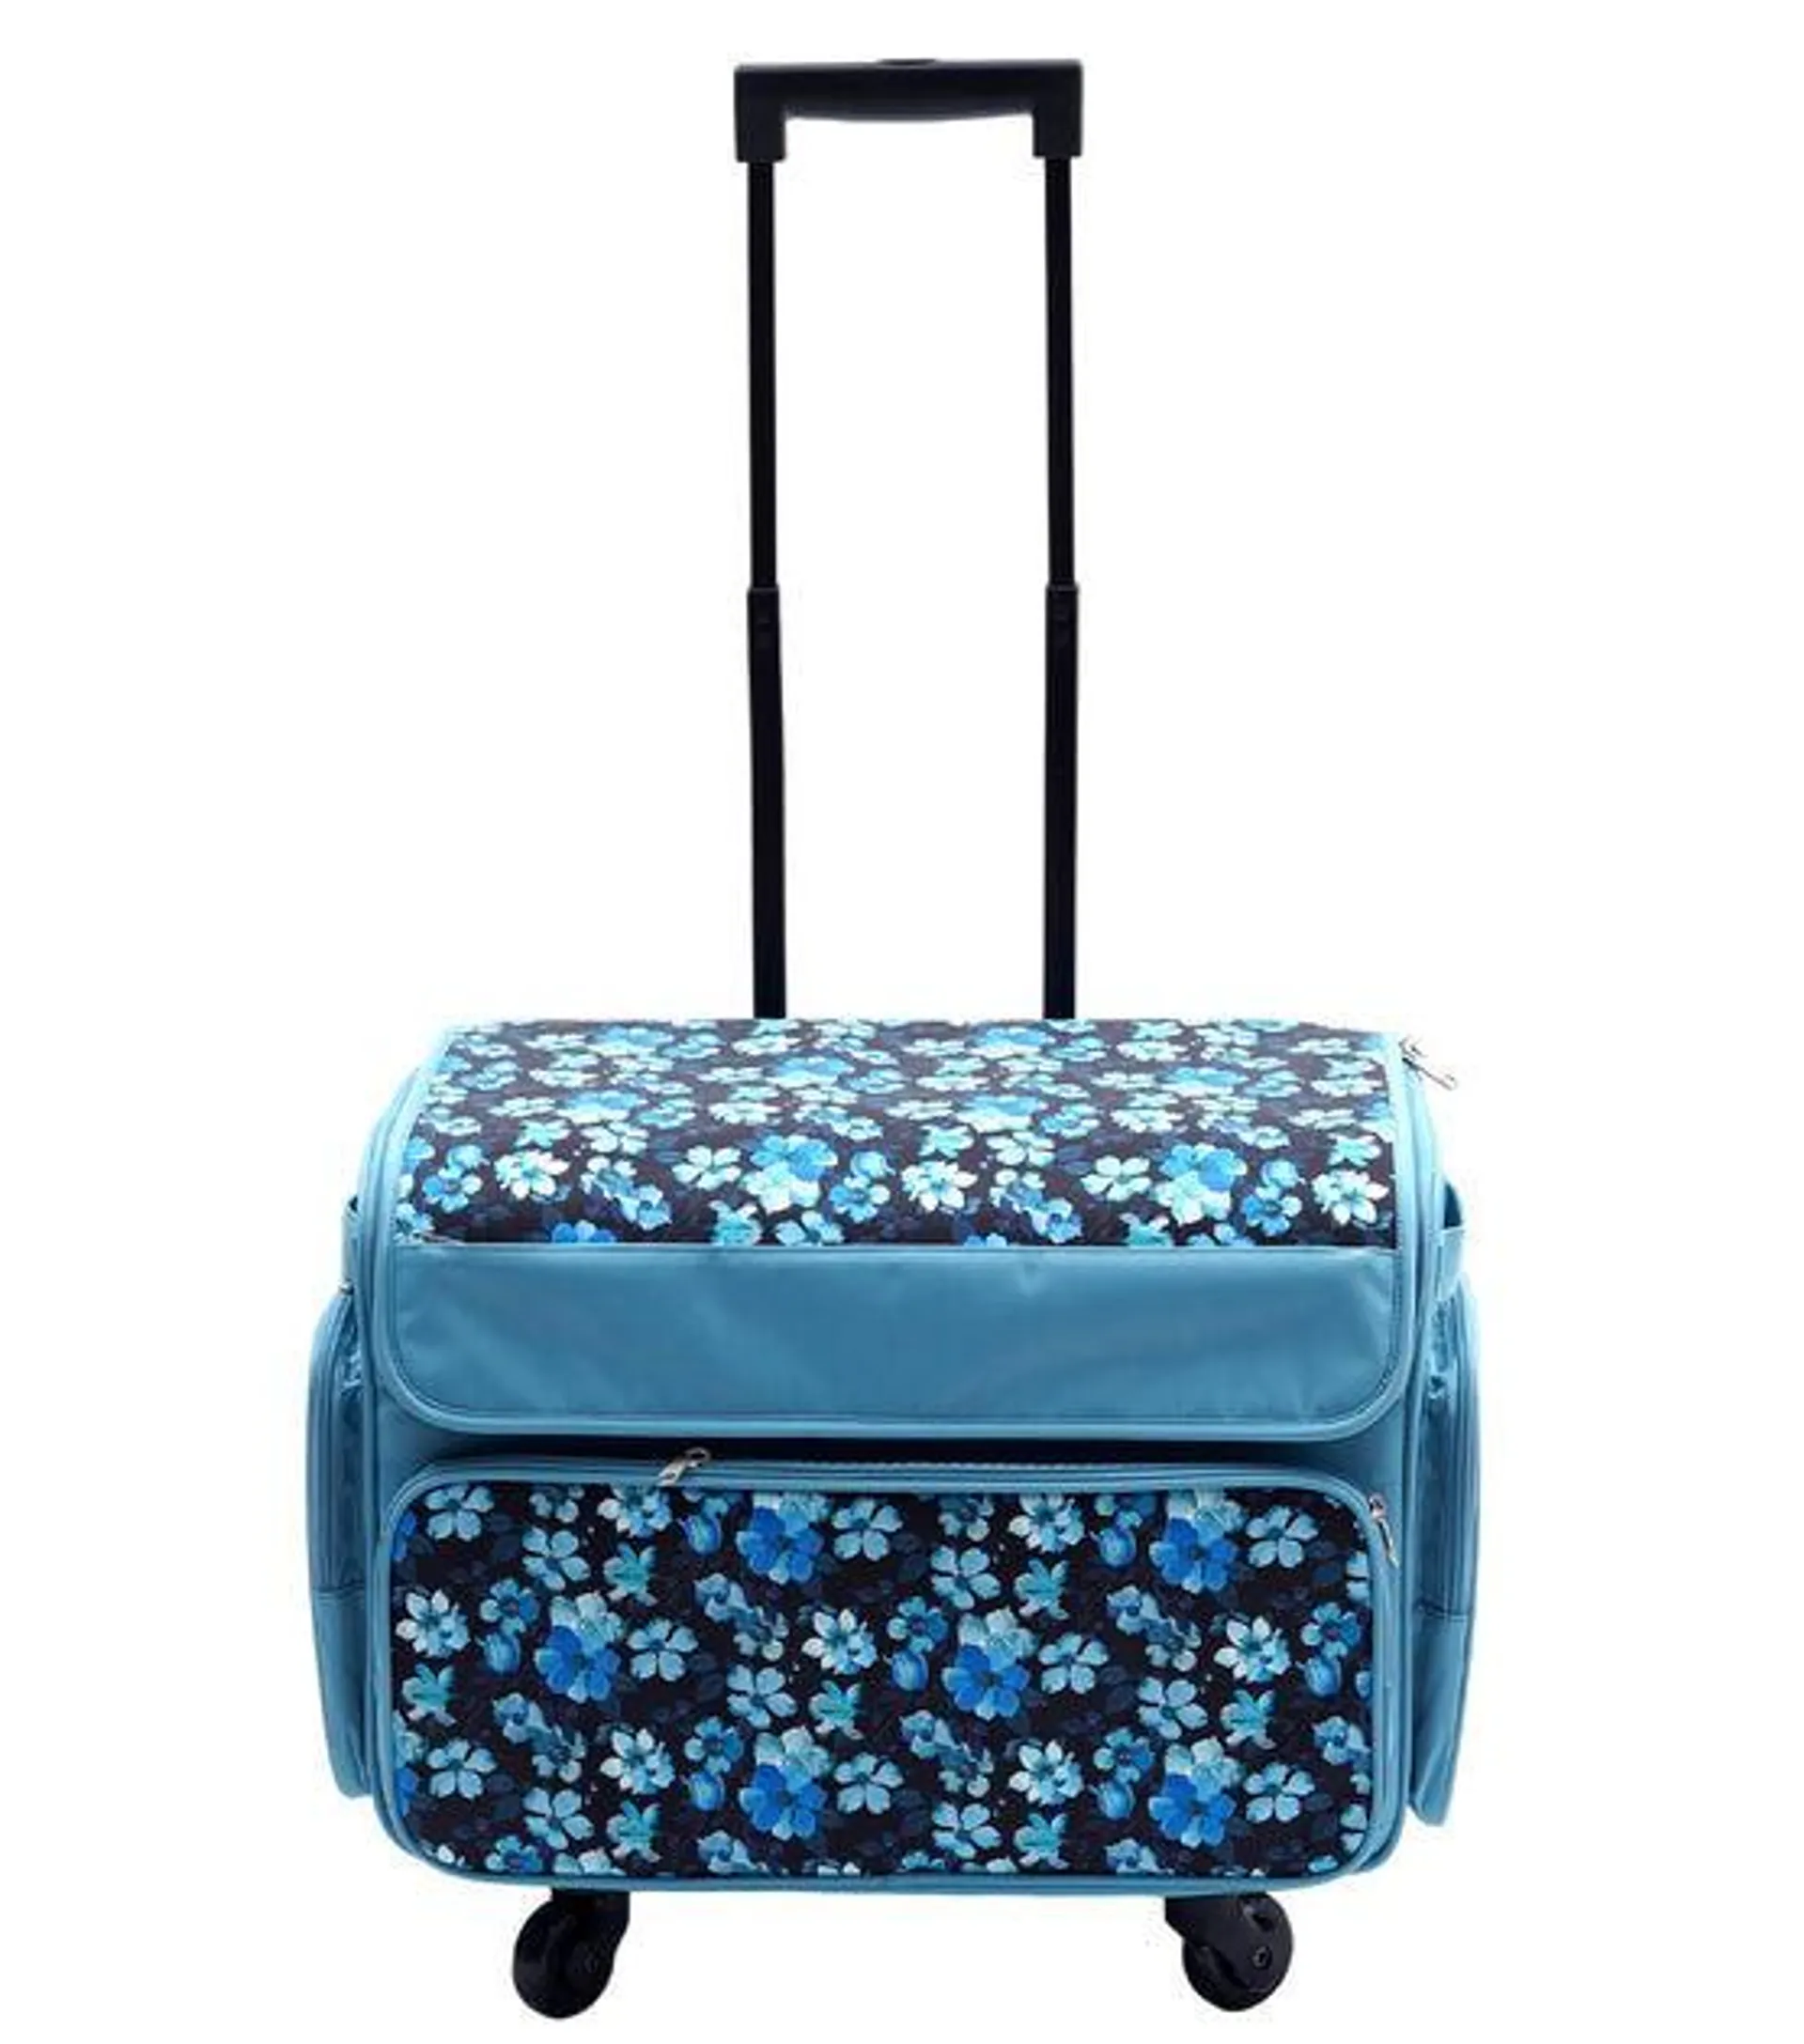 13" x 18" Blue Floral Rolling Sewing Storage Tote by Top Notch